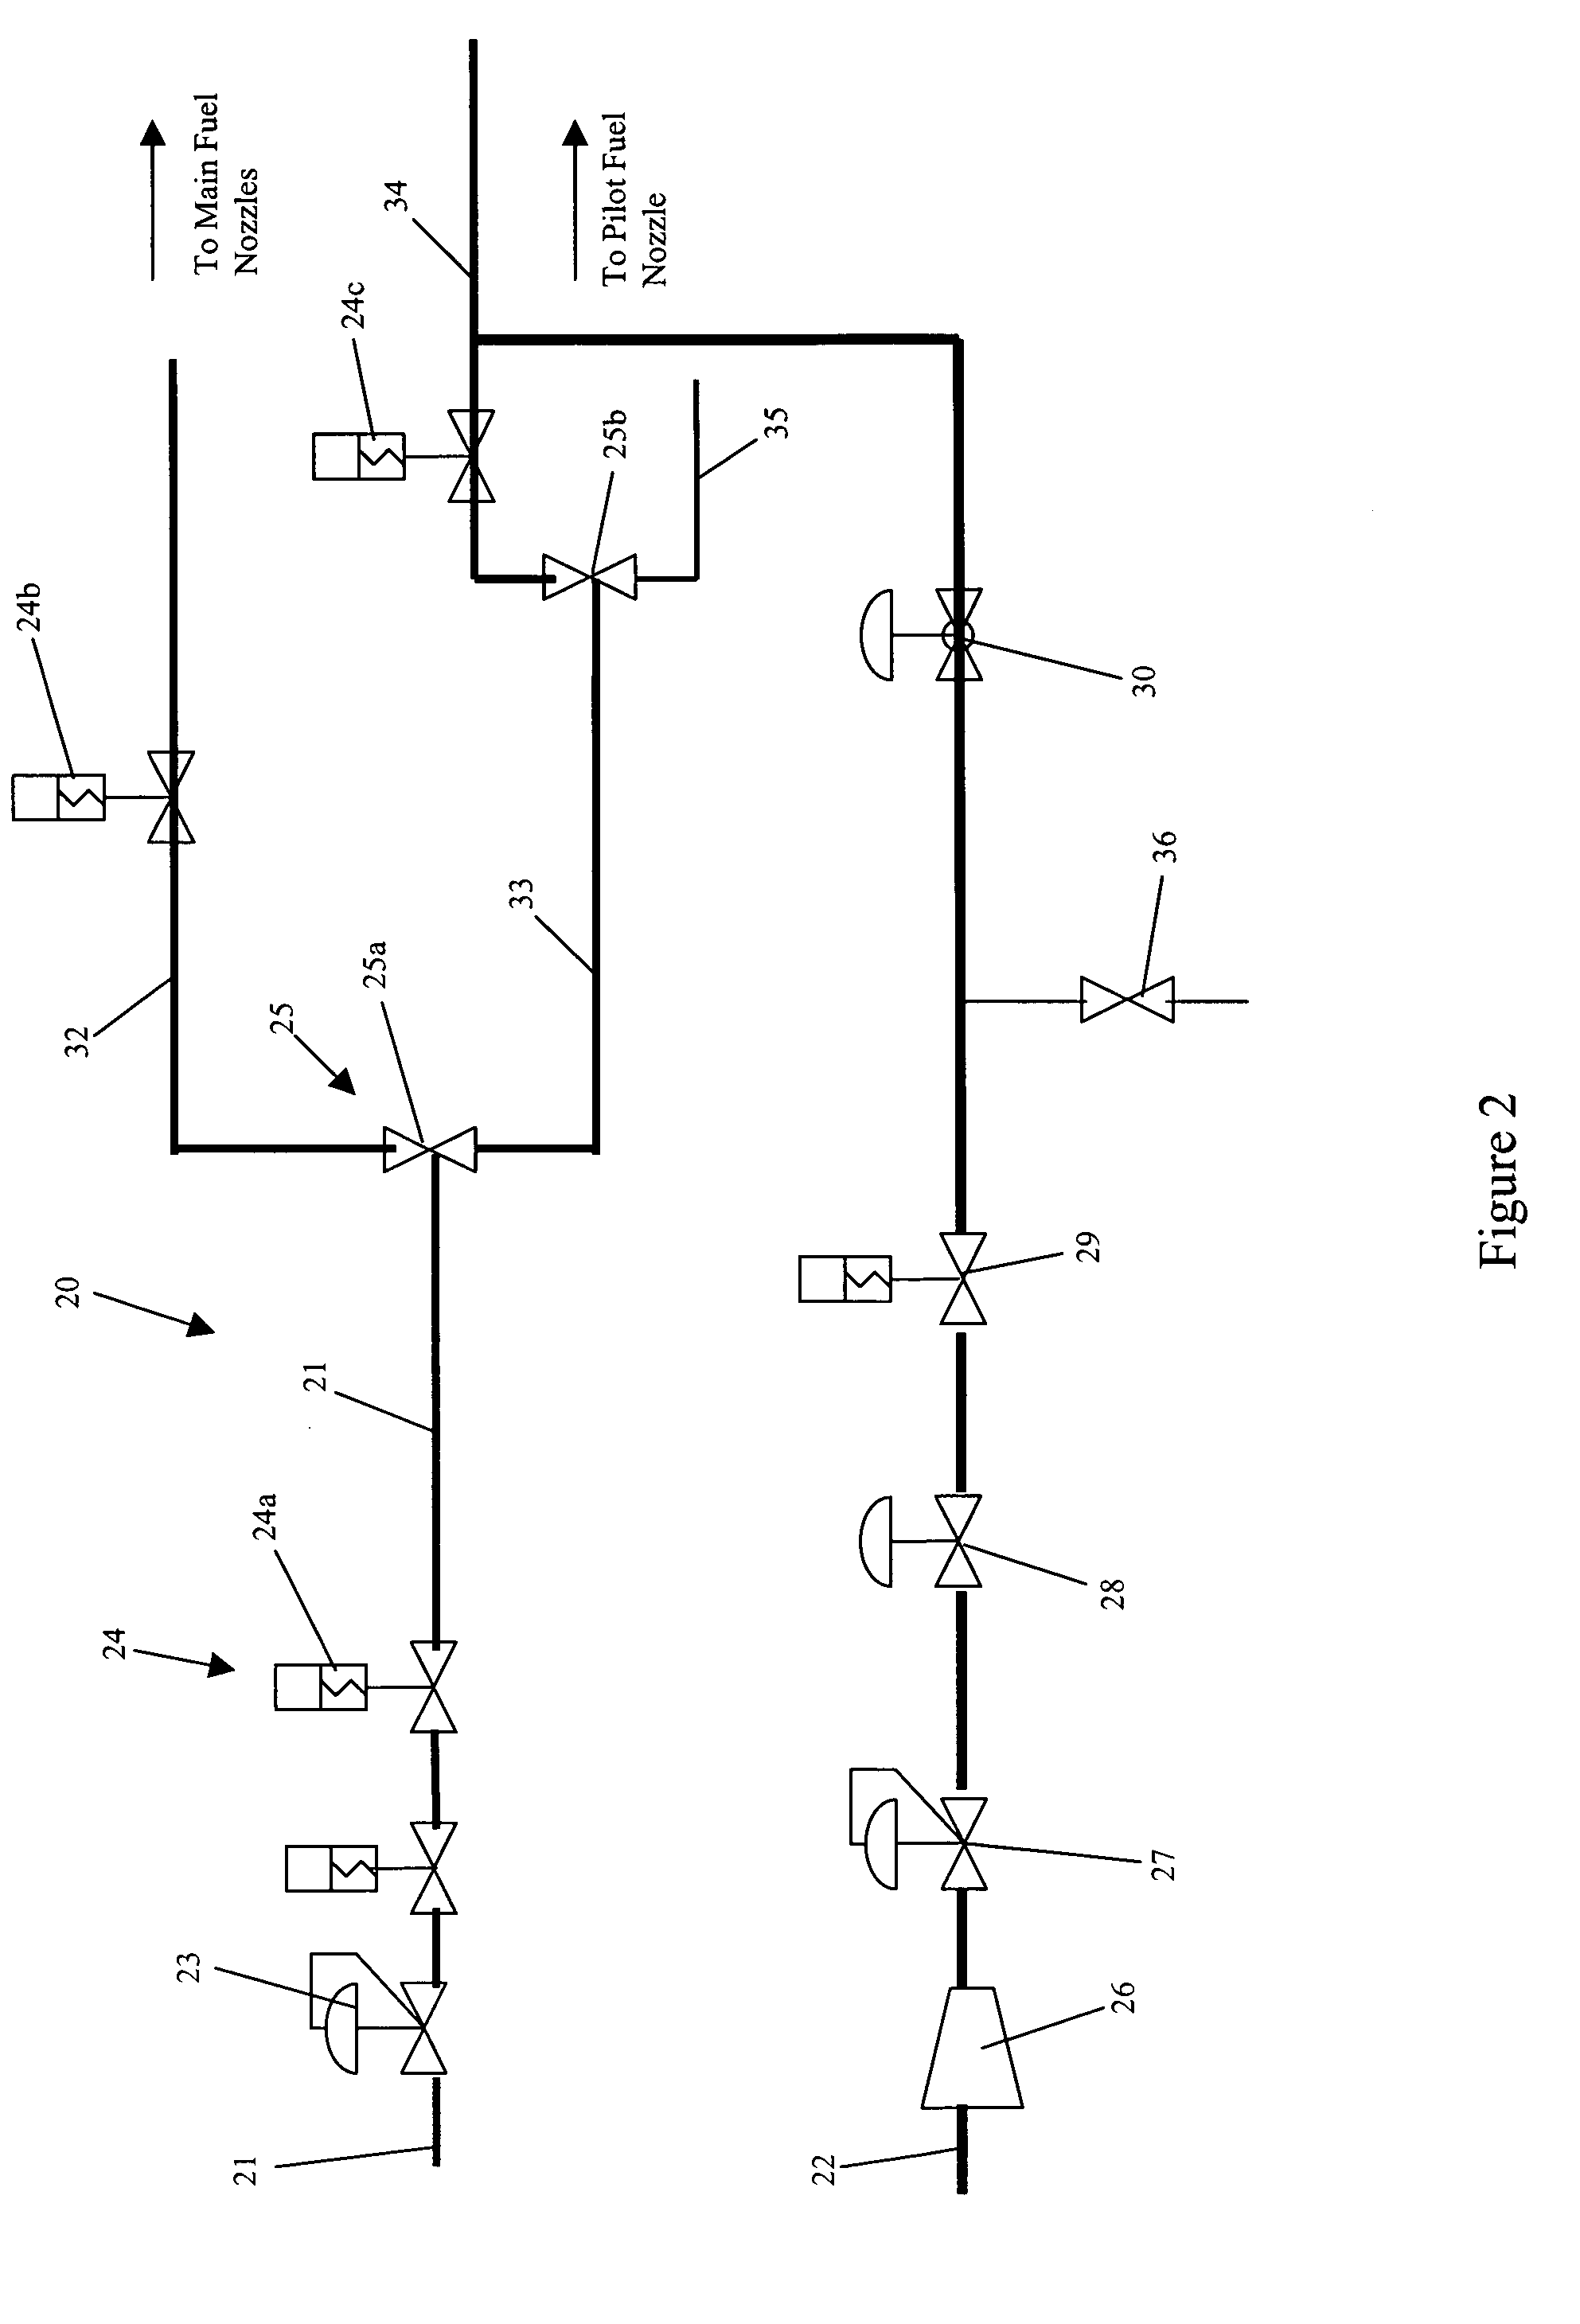 Apparatus and method for providing an off-gas to a combustion system